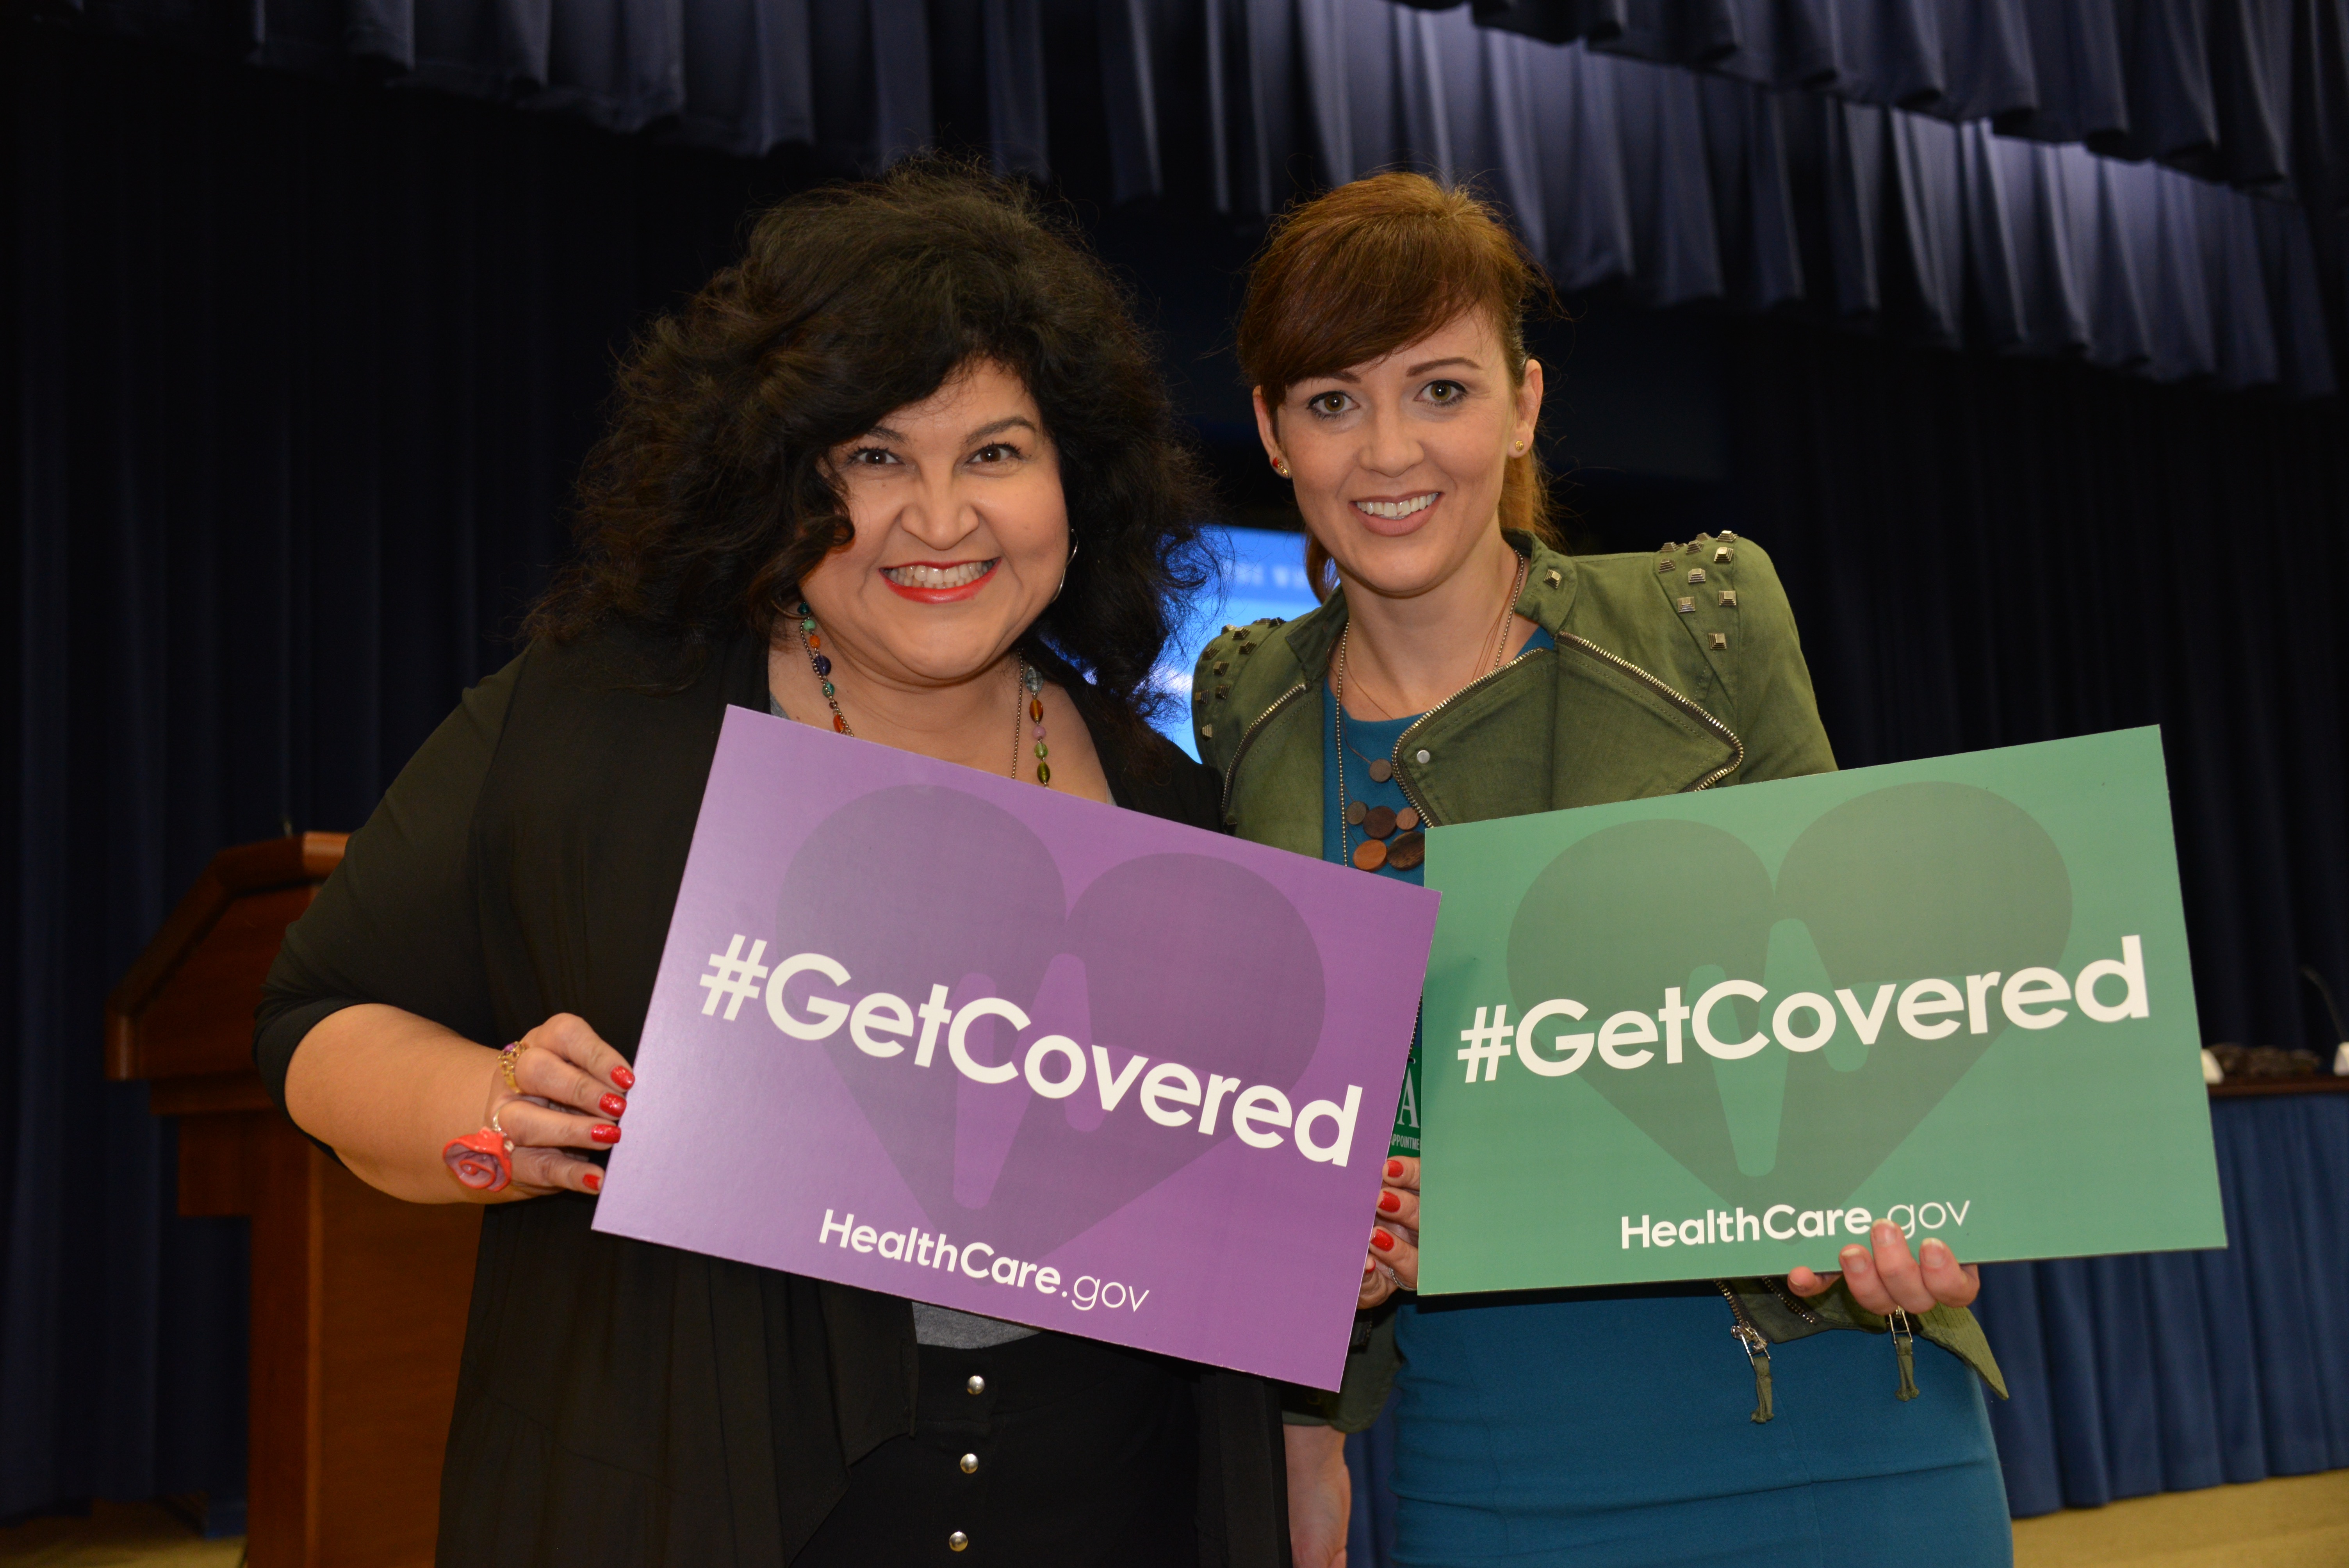 I was happy to see a familiar face at the #GetCovered event at the White House. It's Kathy Cano-Murillo, The Crafty Chica.